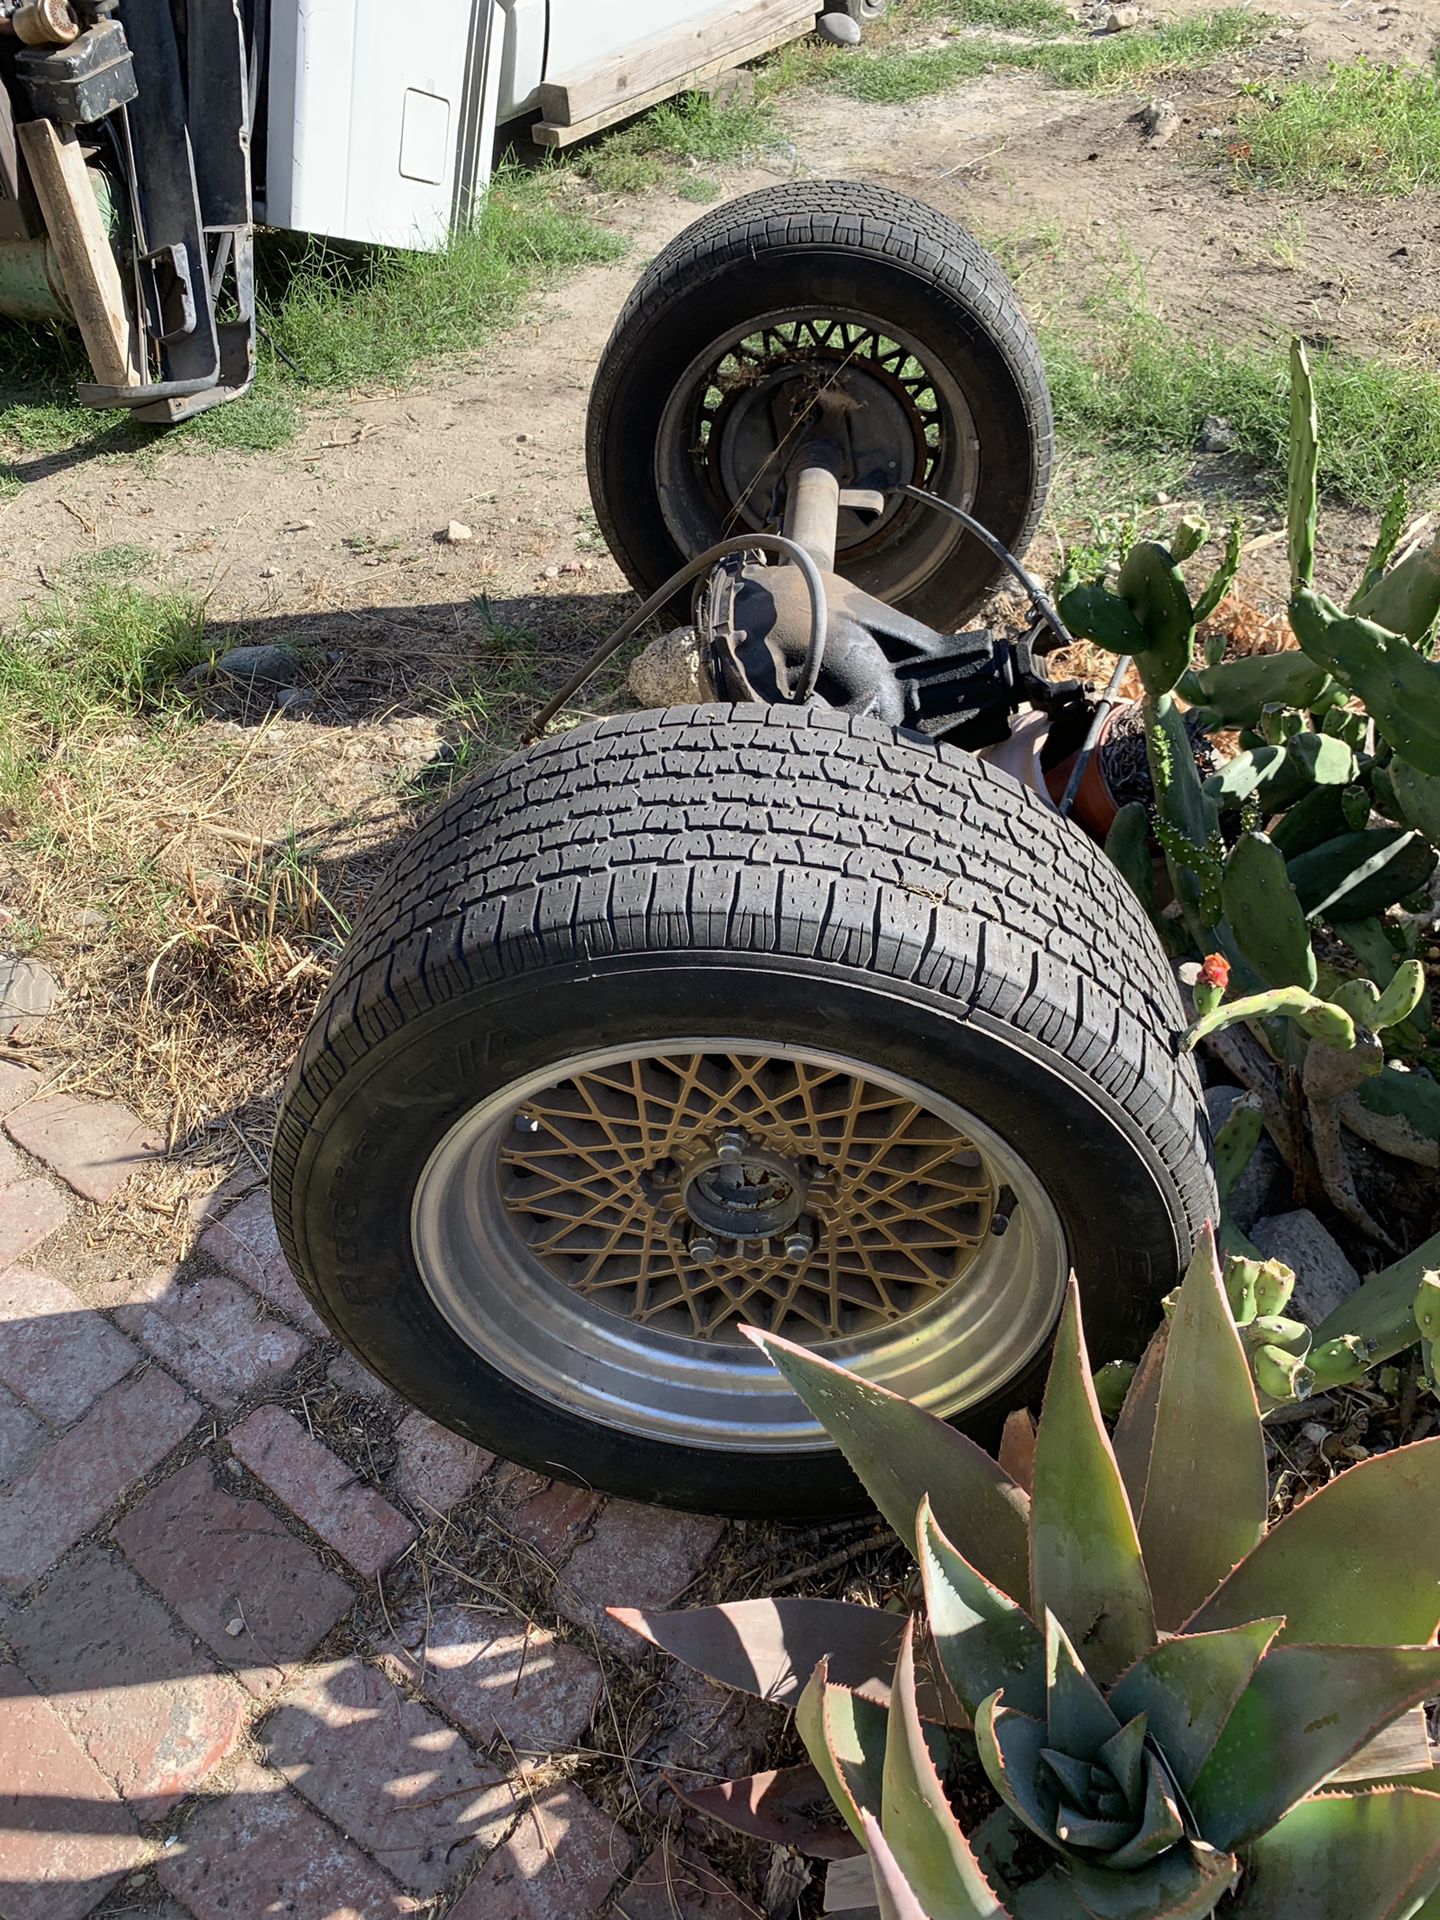 Chevy S10 tires & rear axel